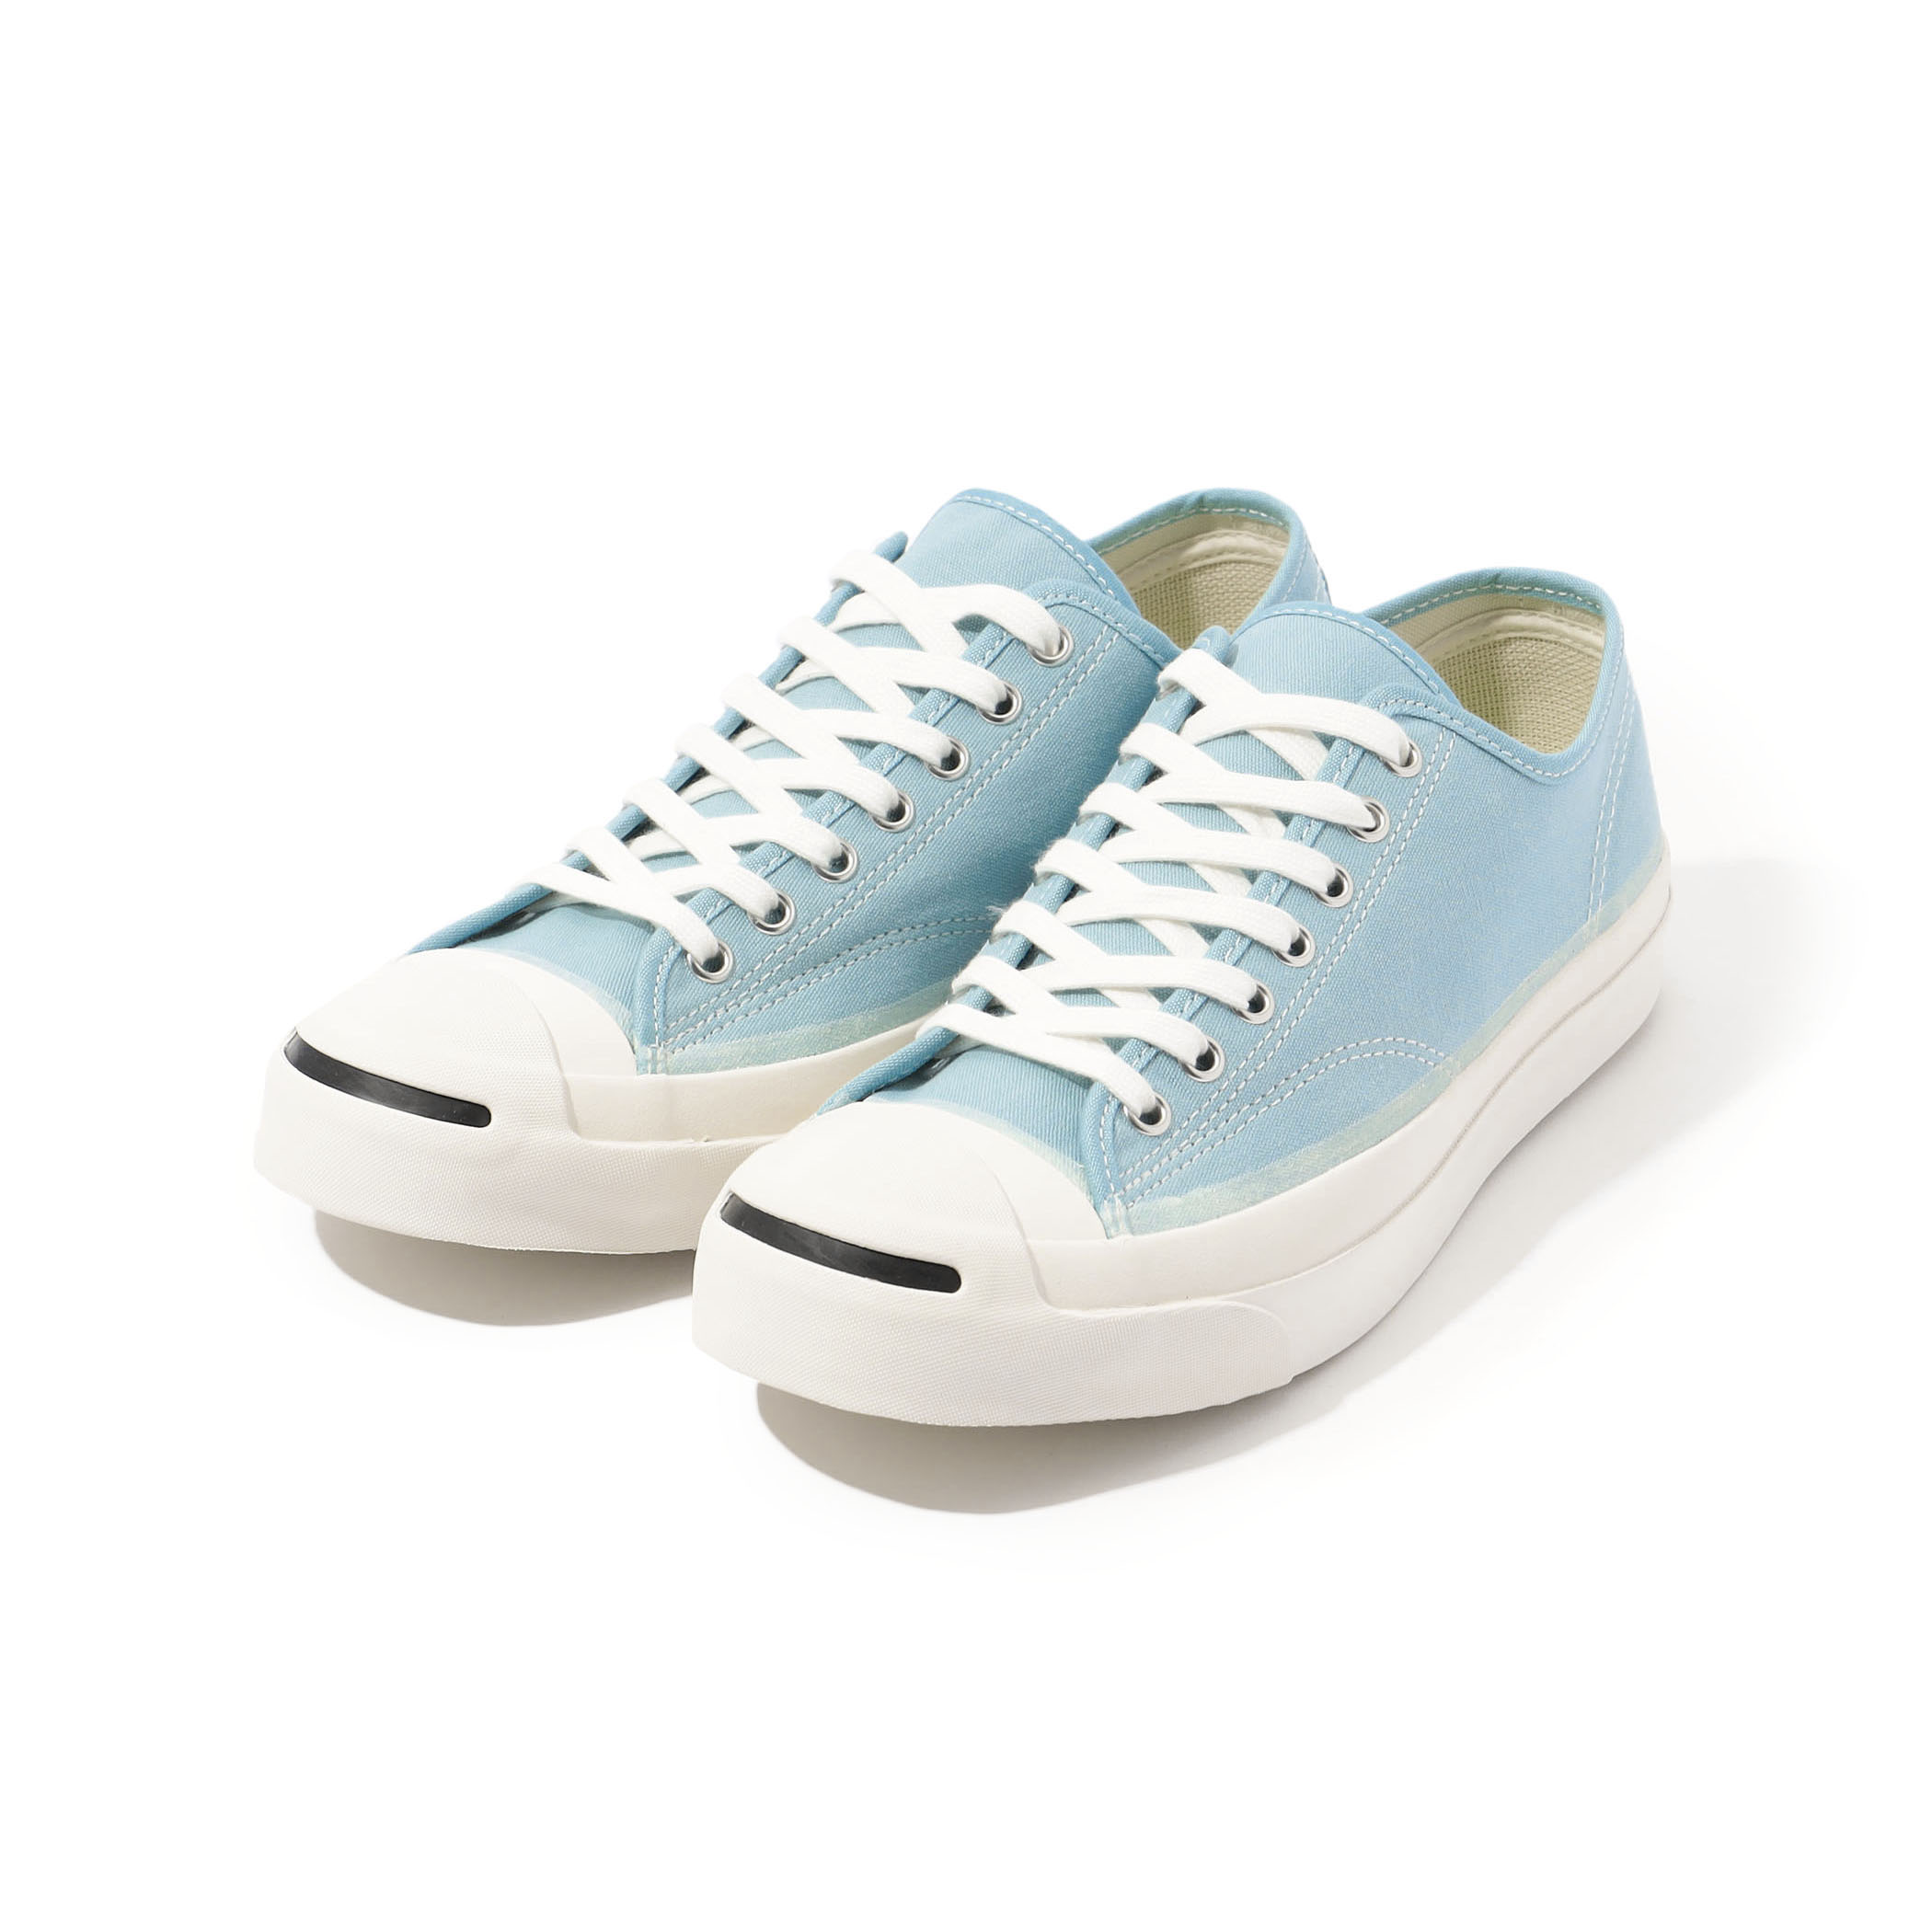 CONVERSE ADDICT JACK PURCELL